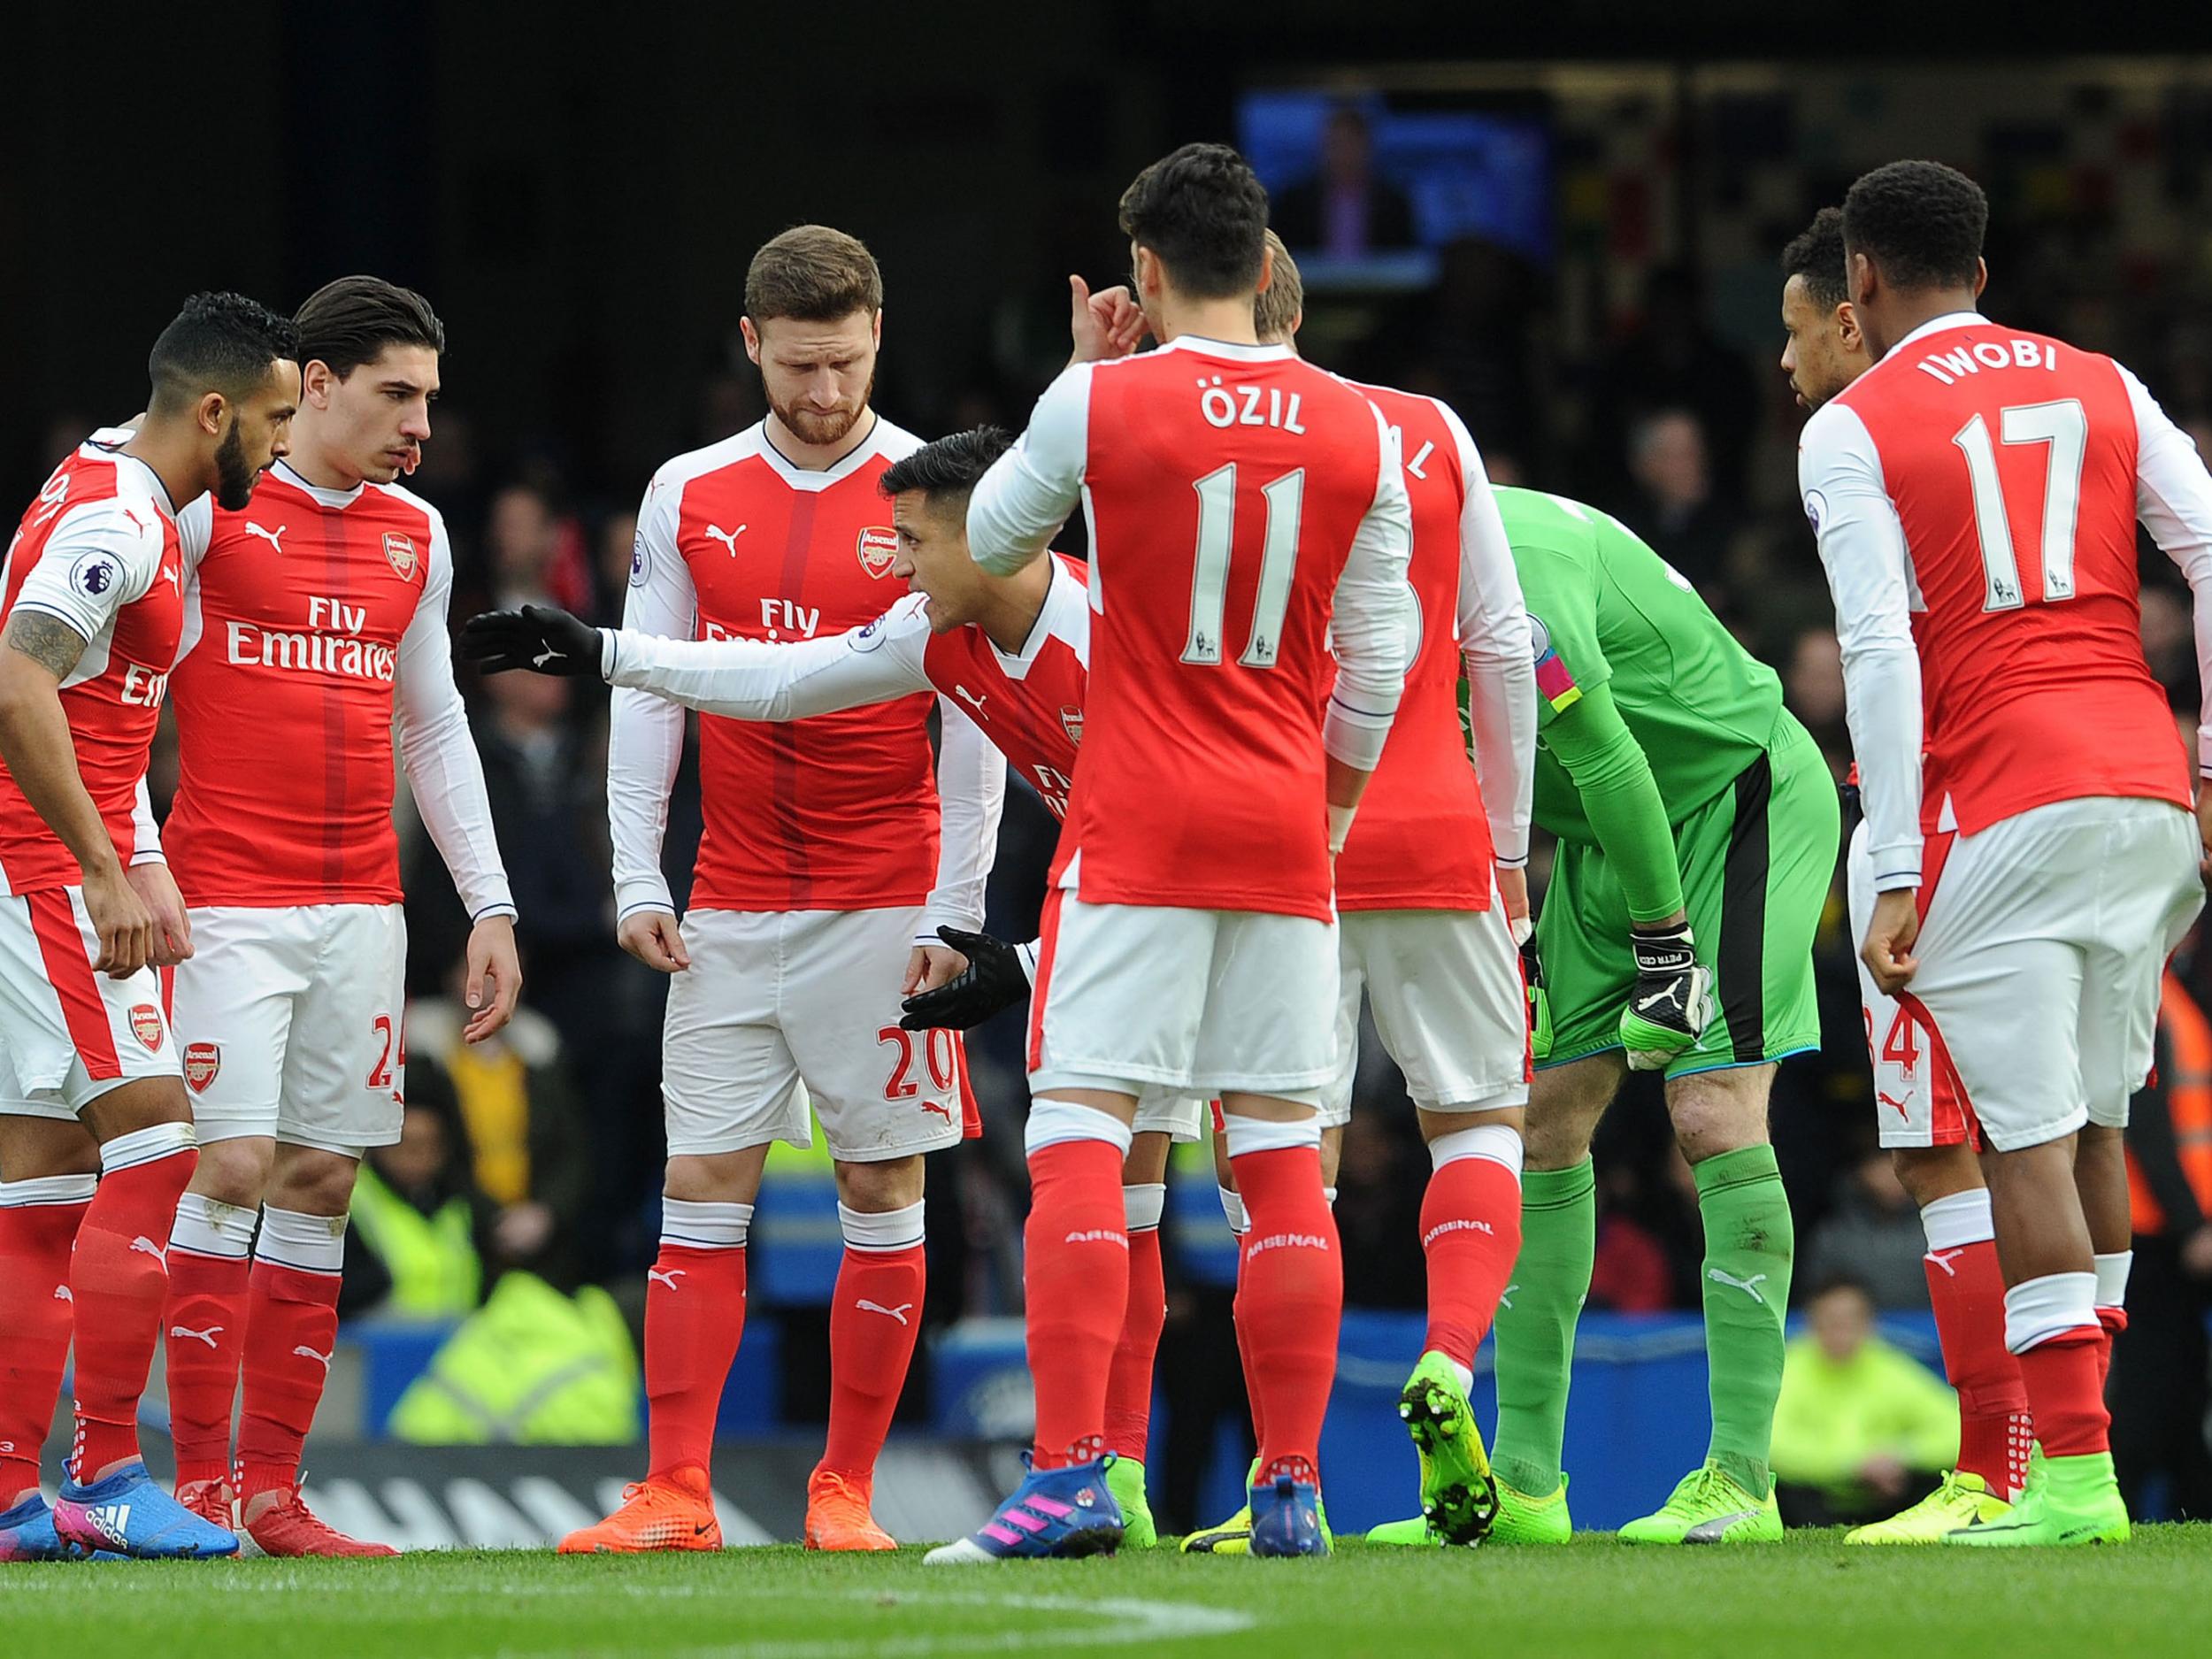 Arsenal have lost their last two games and fallen to fourth in the Premier League